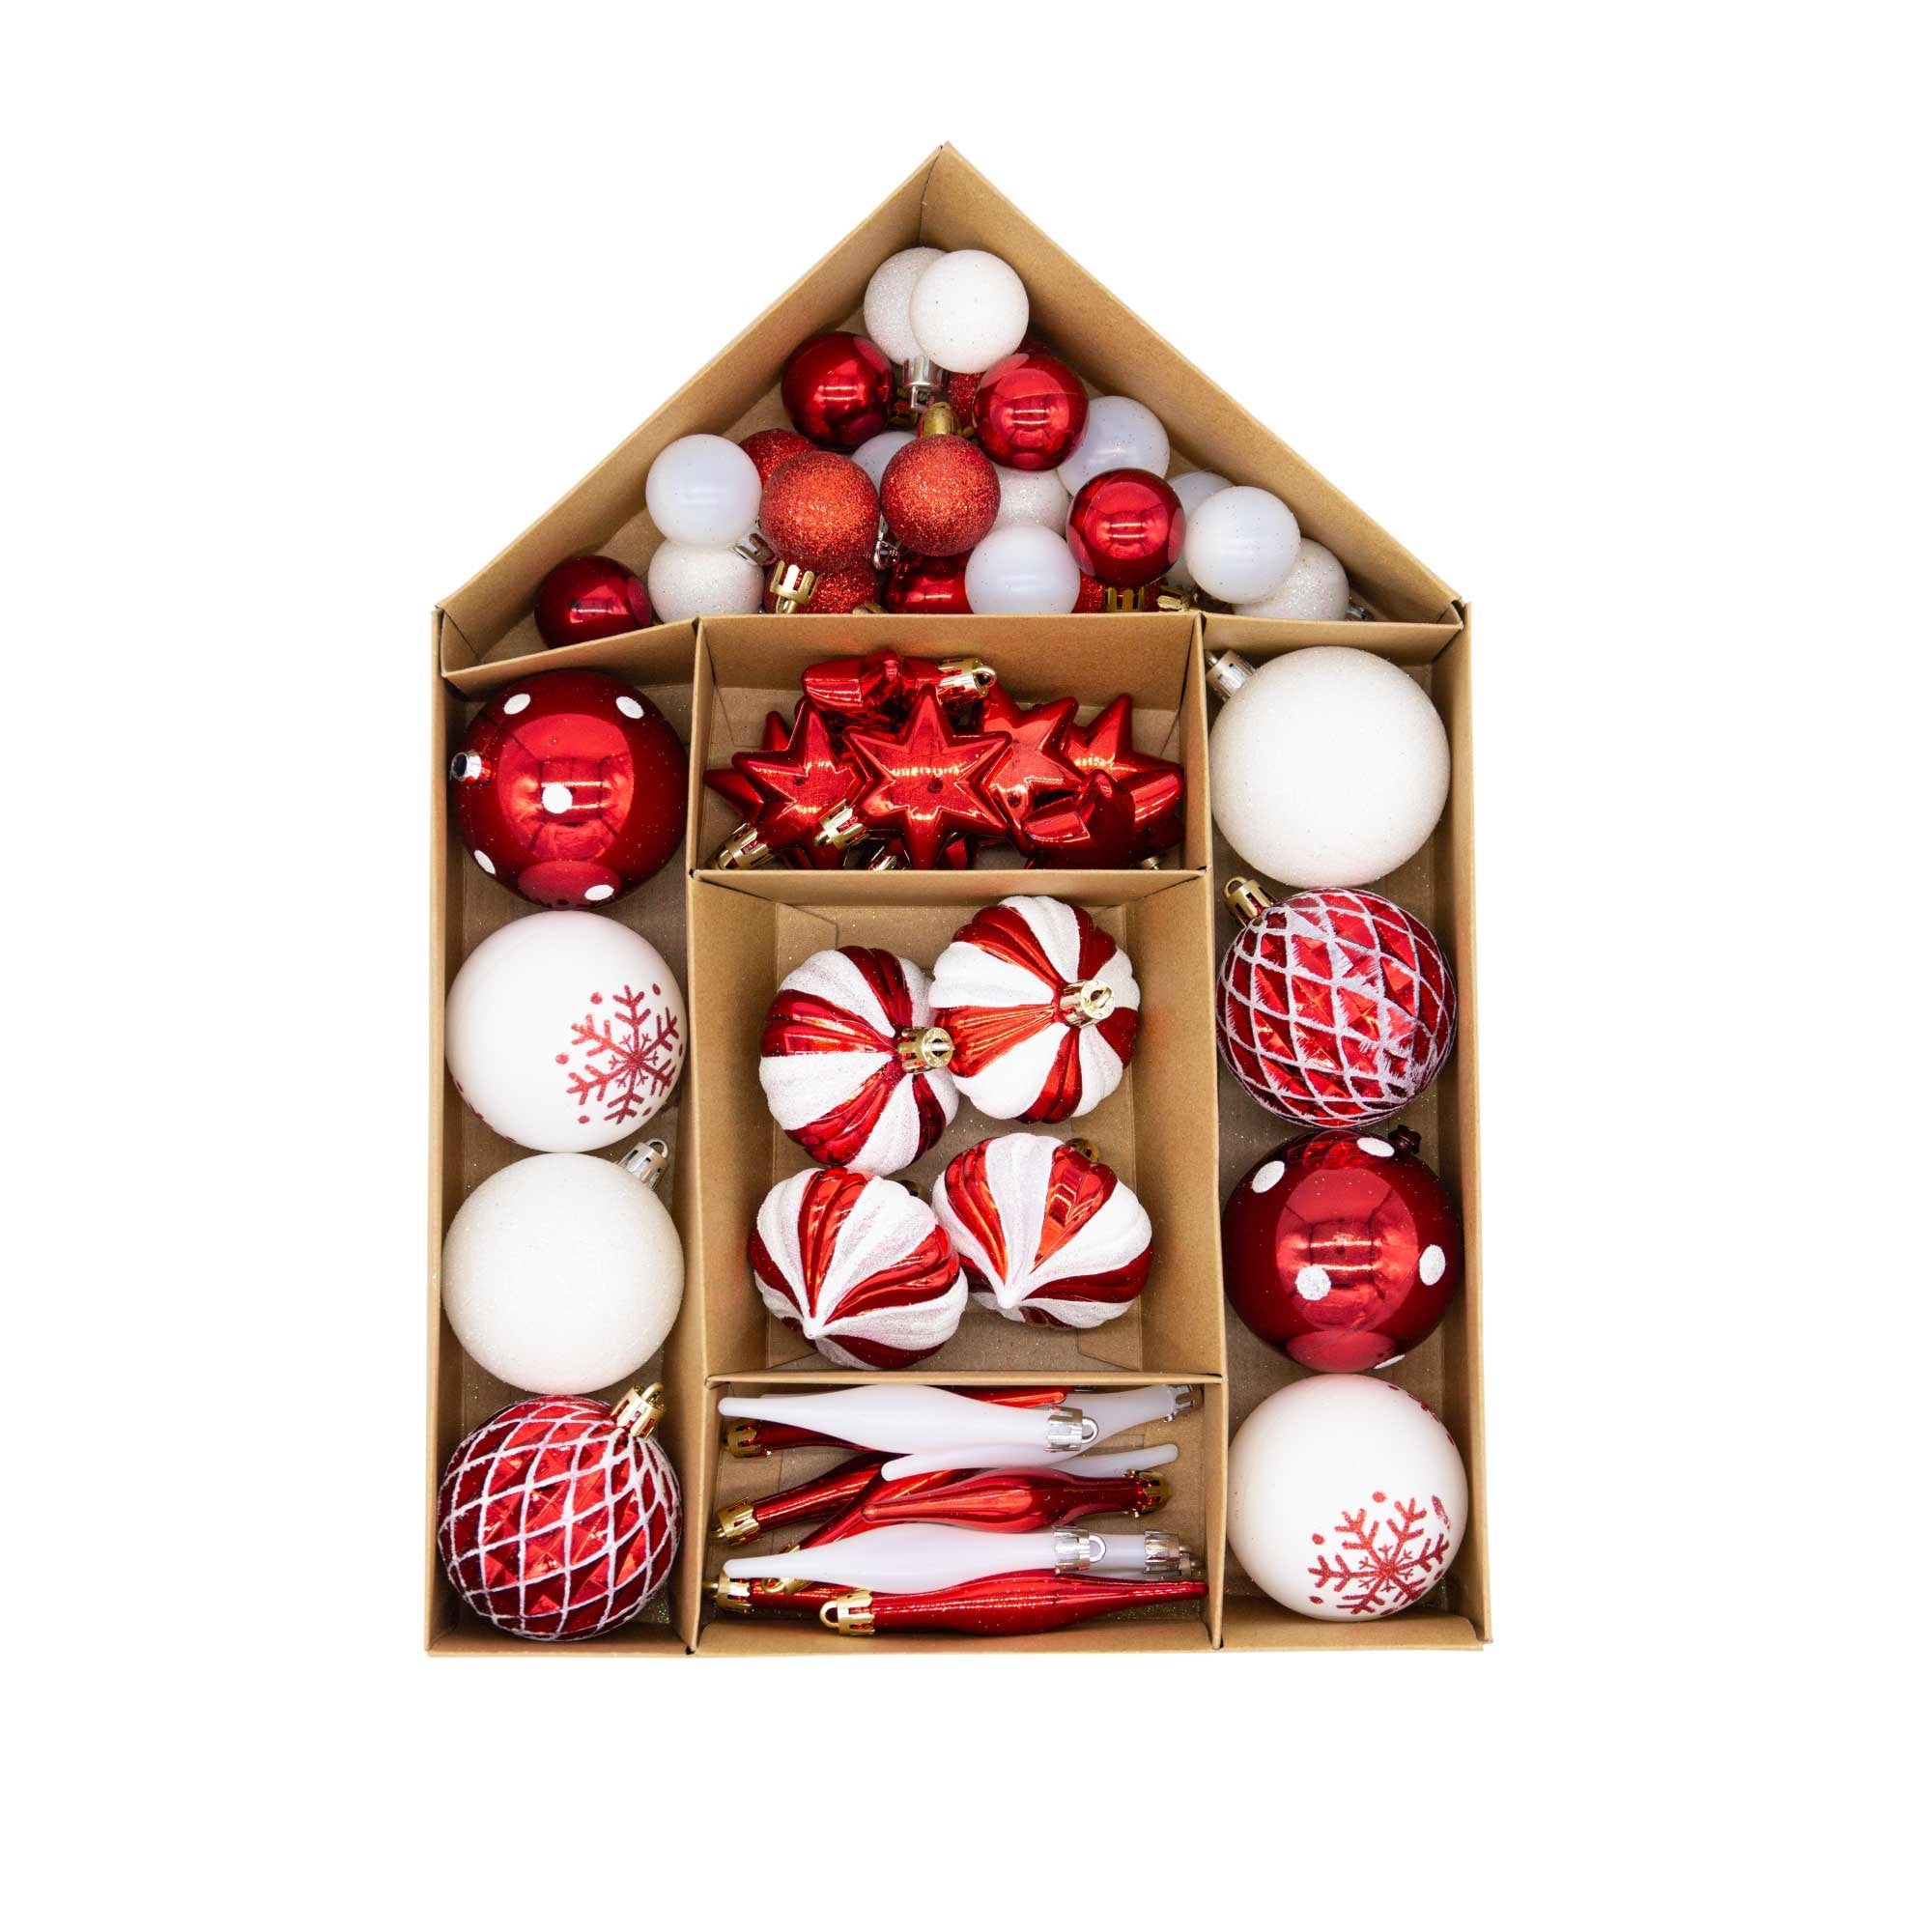 Christmas Sparkle Bauble Box of 56 pieces - Red & White  | TJ Hughes